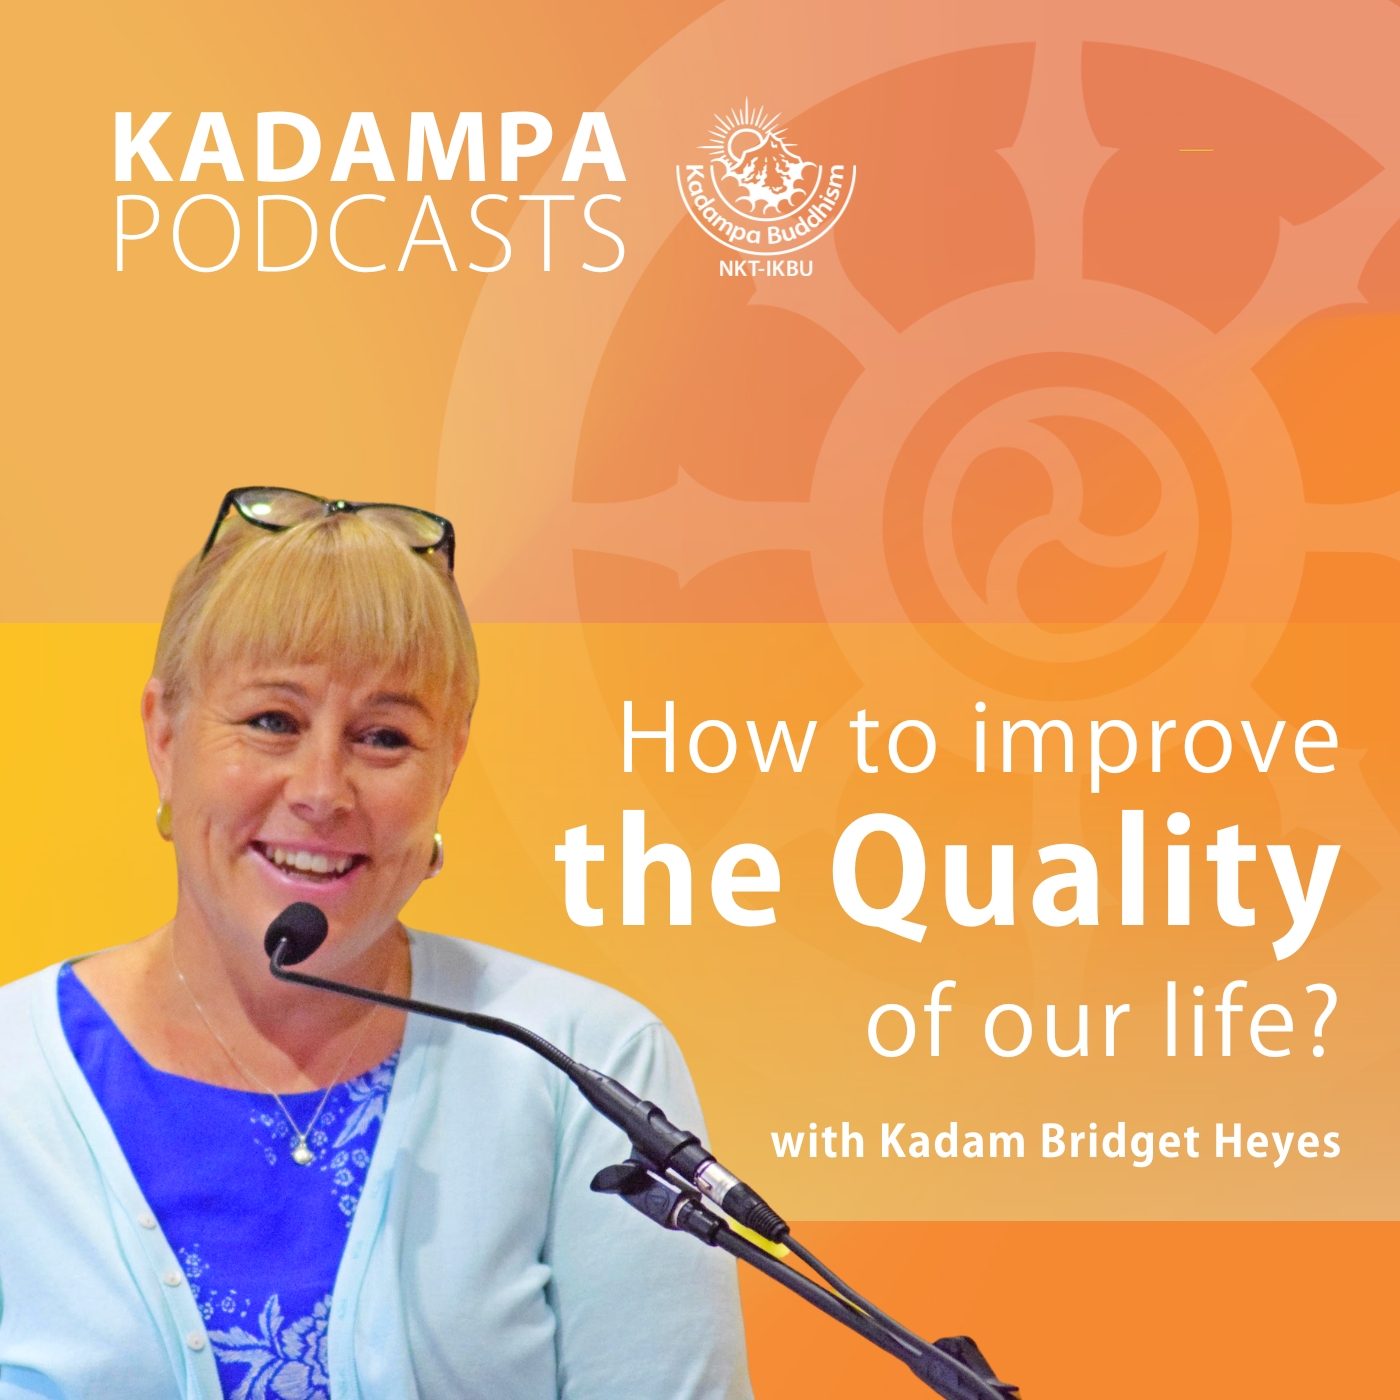 How to improve the Quality of Our Life